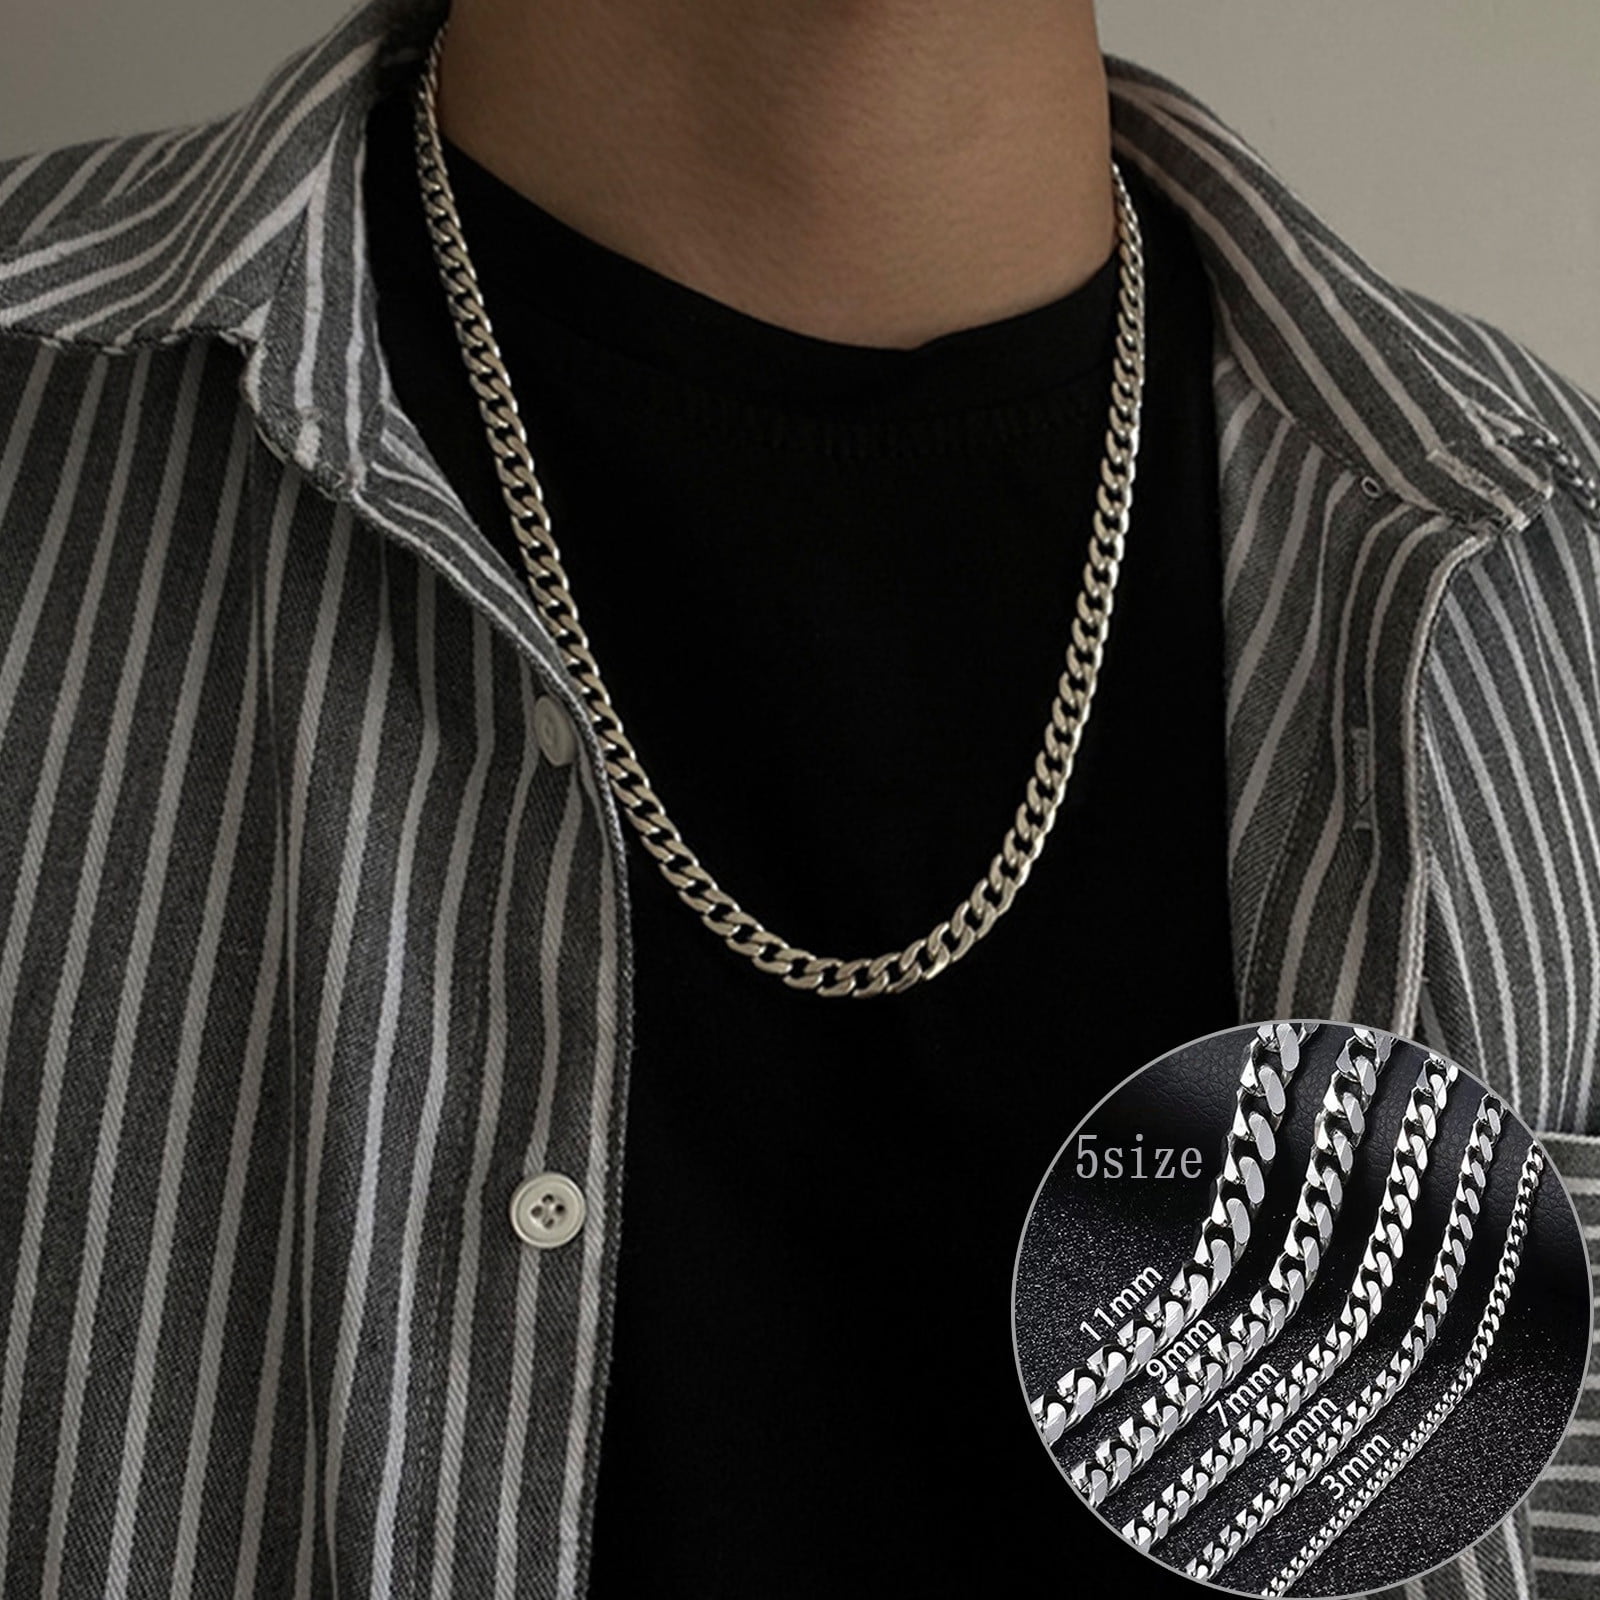 Buy Bar Pendant Necklace Men Stainless Steel Box Chain Pendant Necklace For Men  Jewelry Gift Length 22inch, Stainless Steel, No Gemstone, at Amazon.in